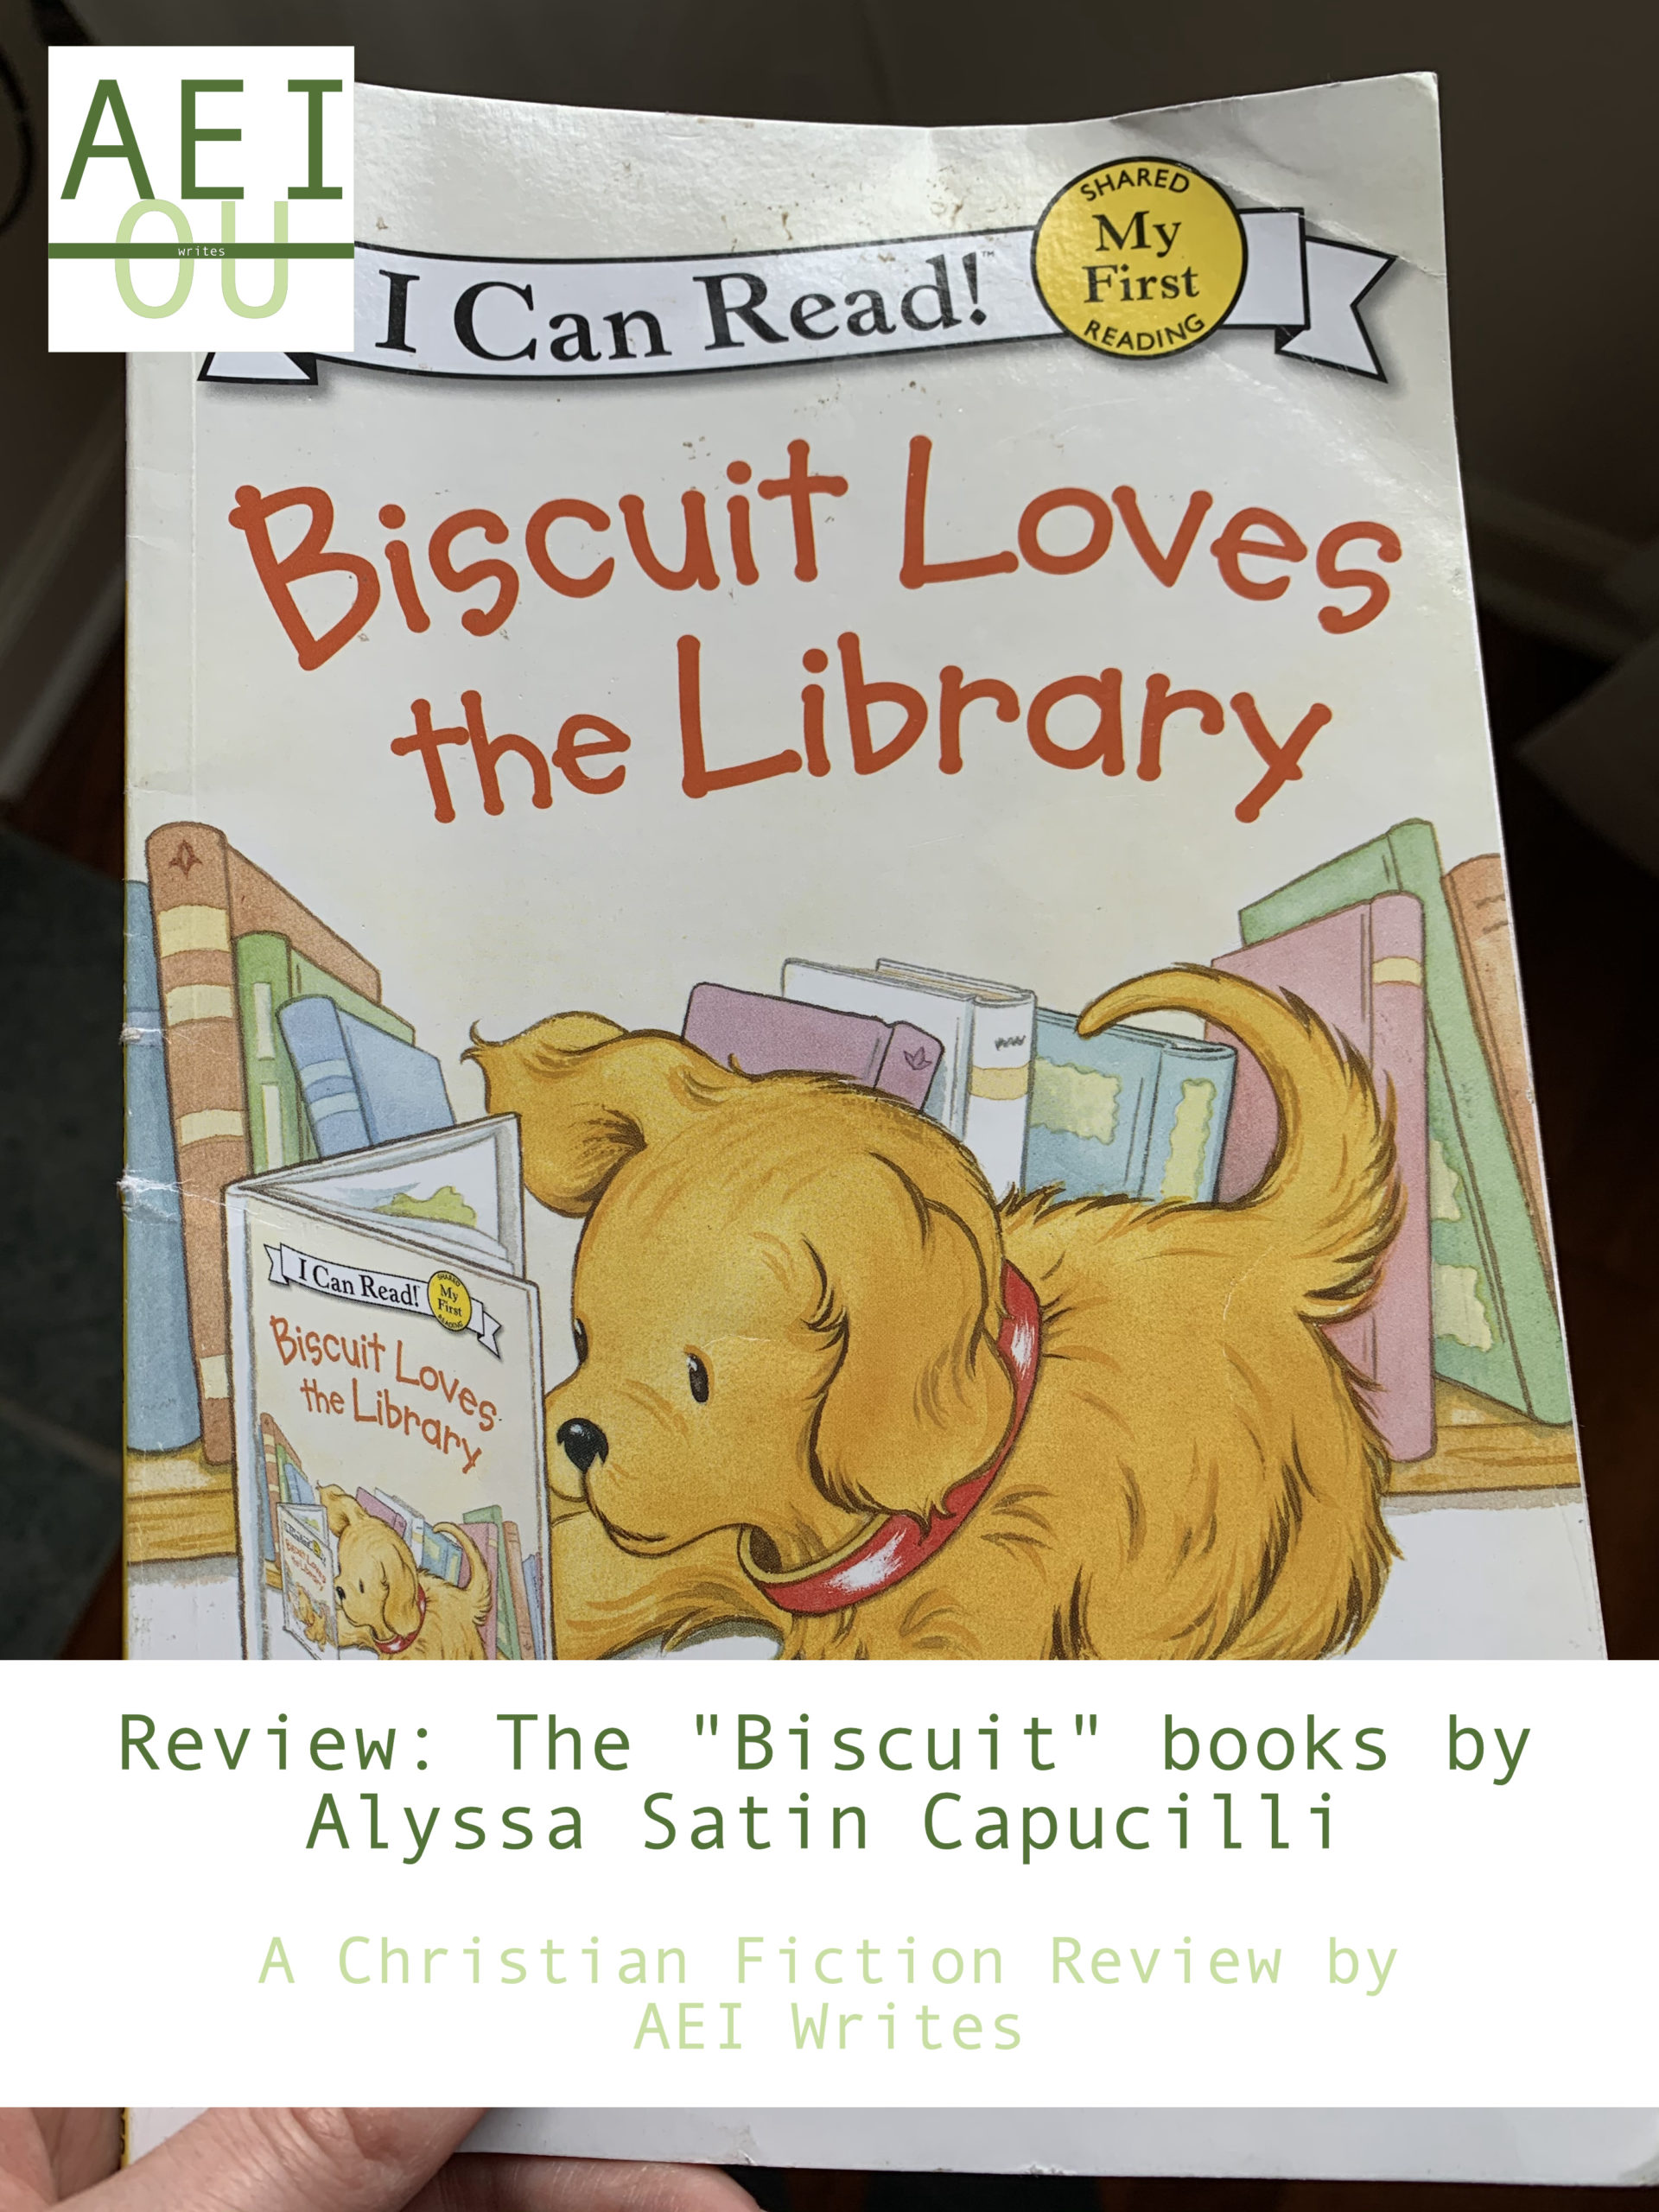 Review: The “Biscuit” Books by Alyssa Satin Capucilli